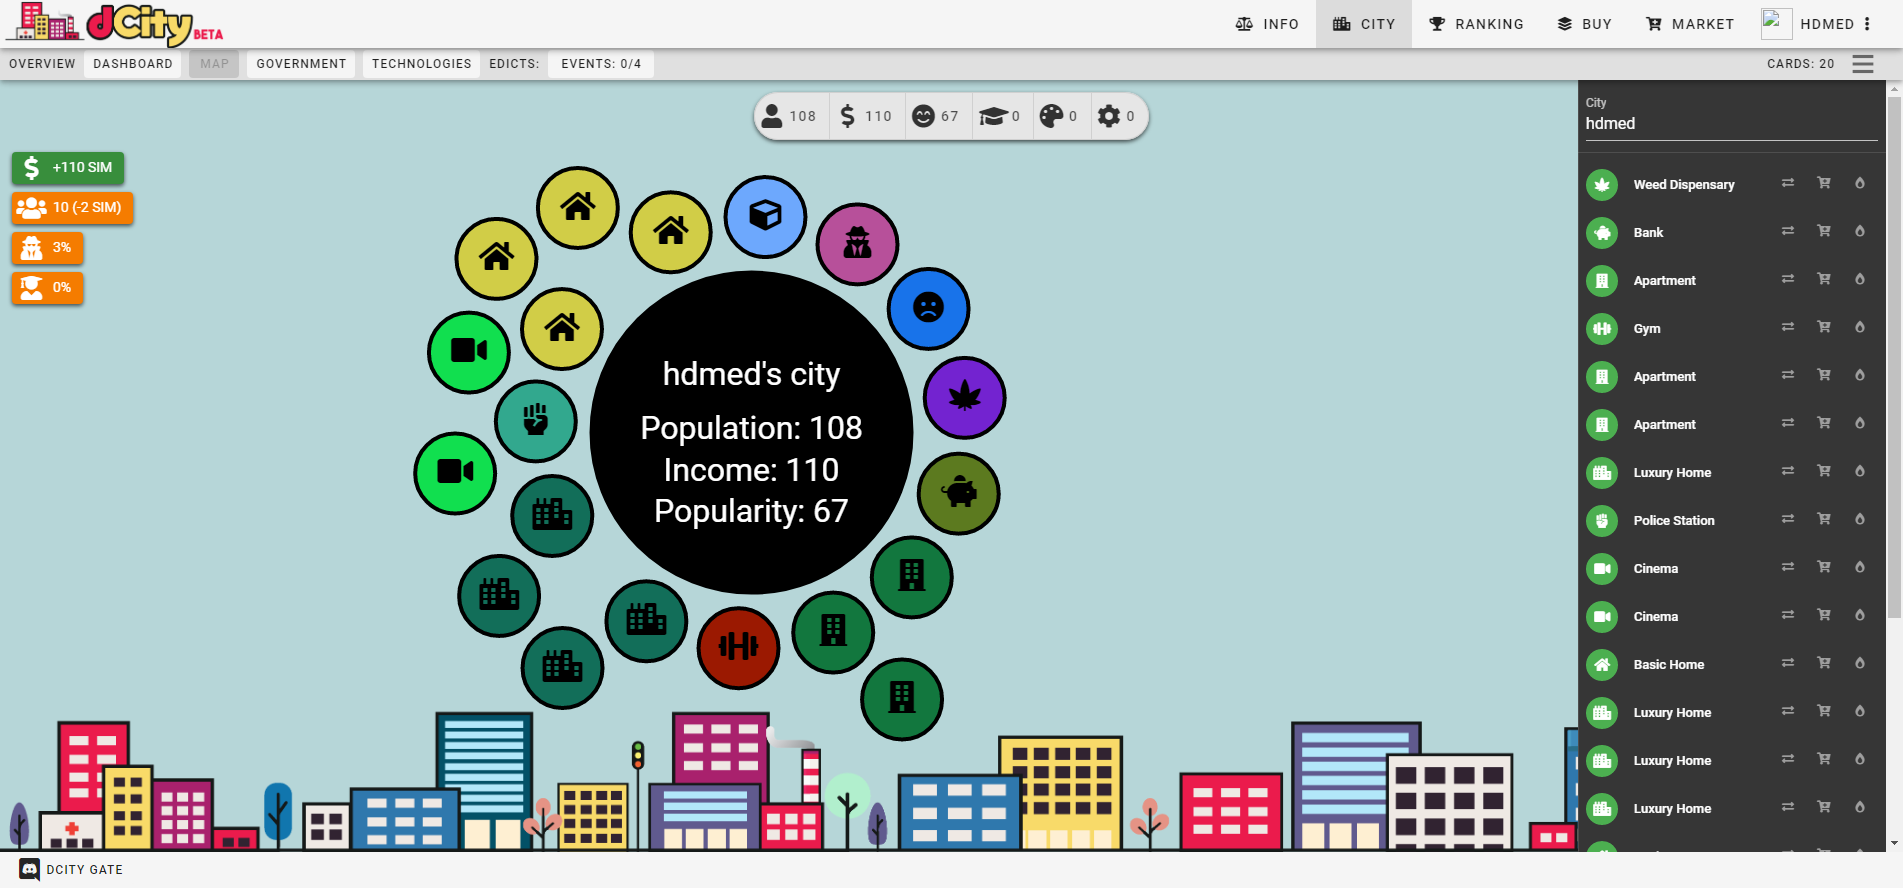 dCITY_io_City (11).png